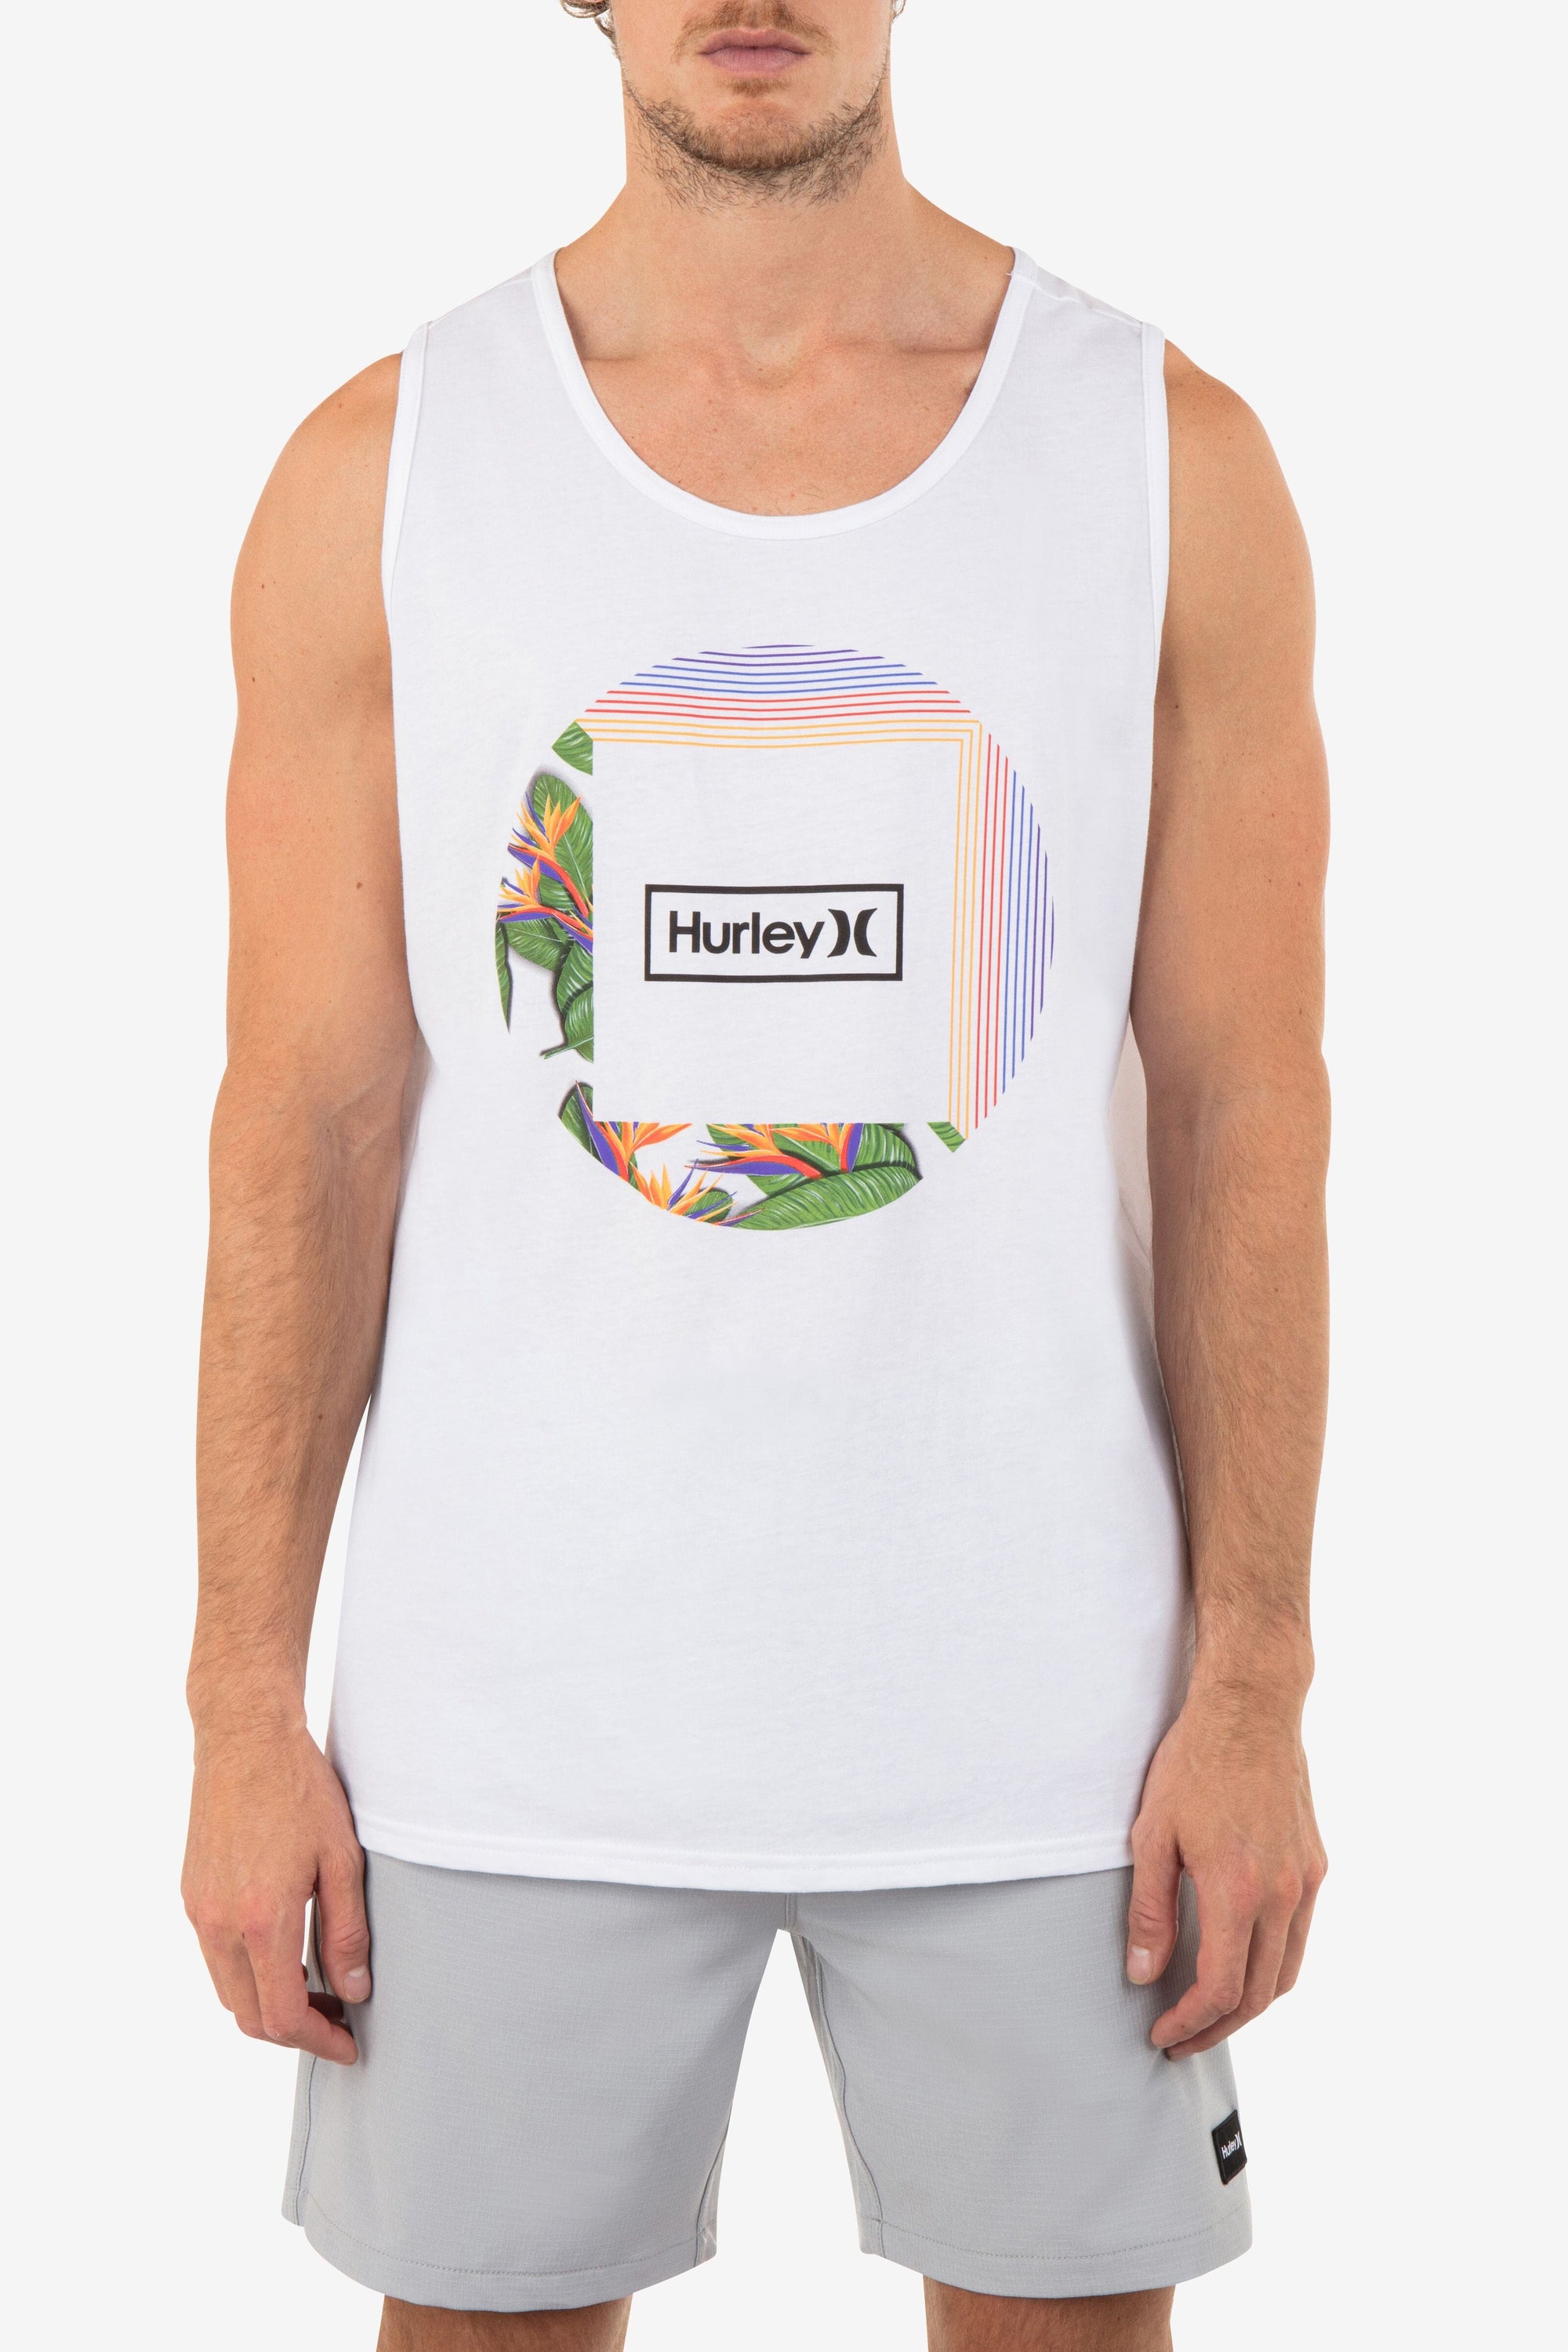 HURLEY Everyday Cyclical Tank Top White Men's Tank Tops Hurley 